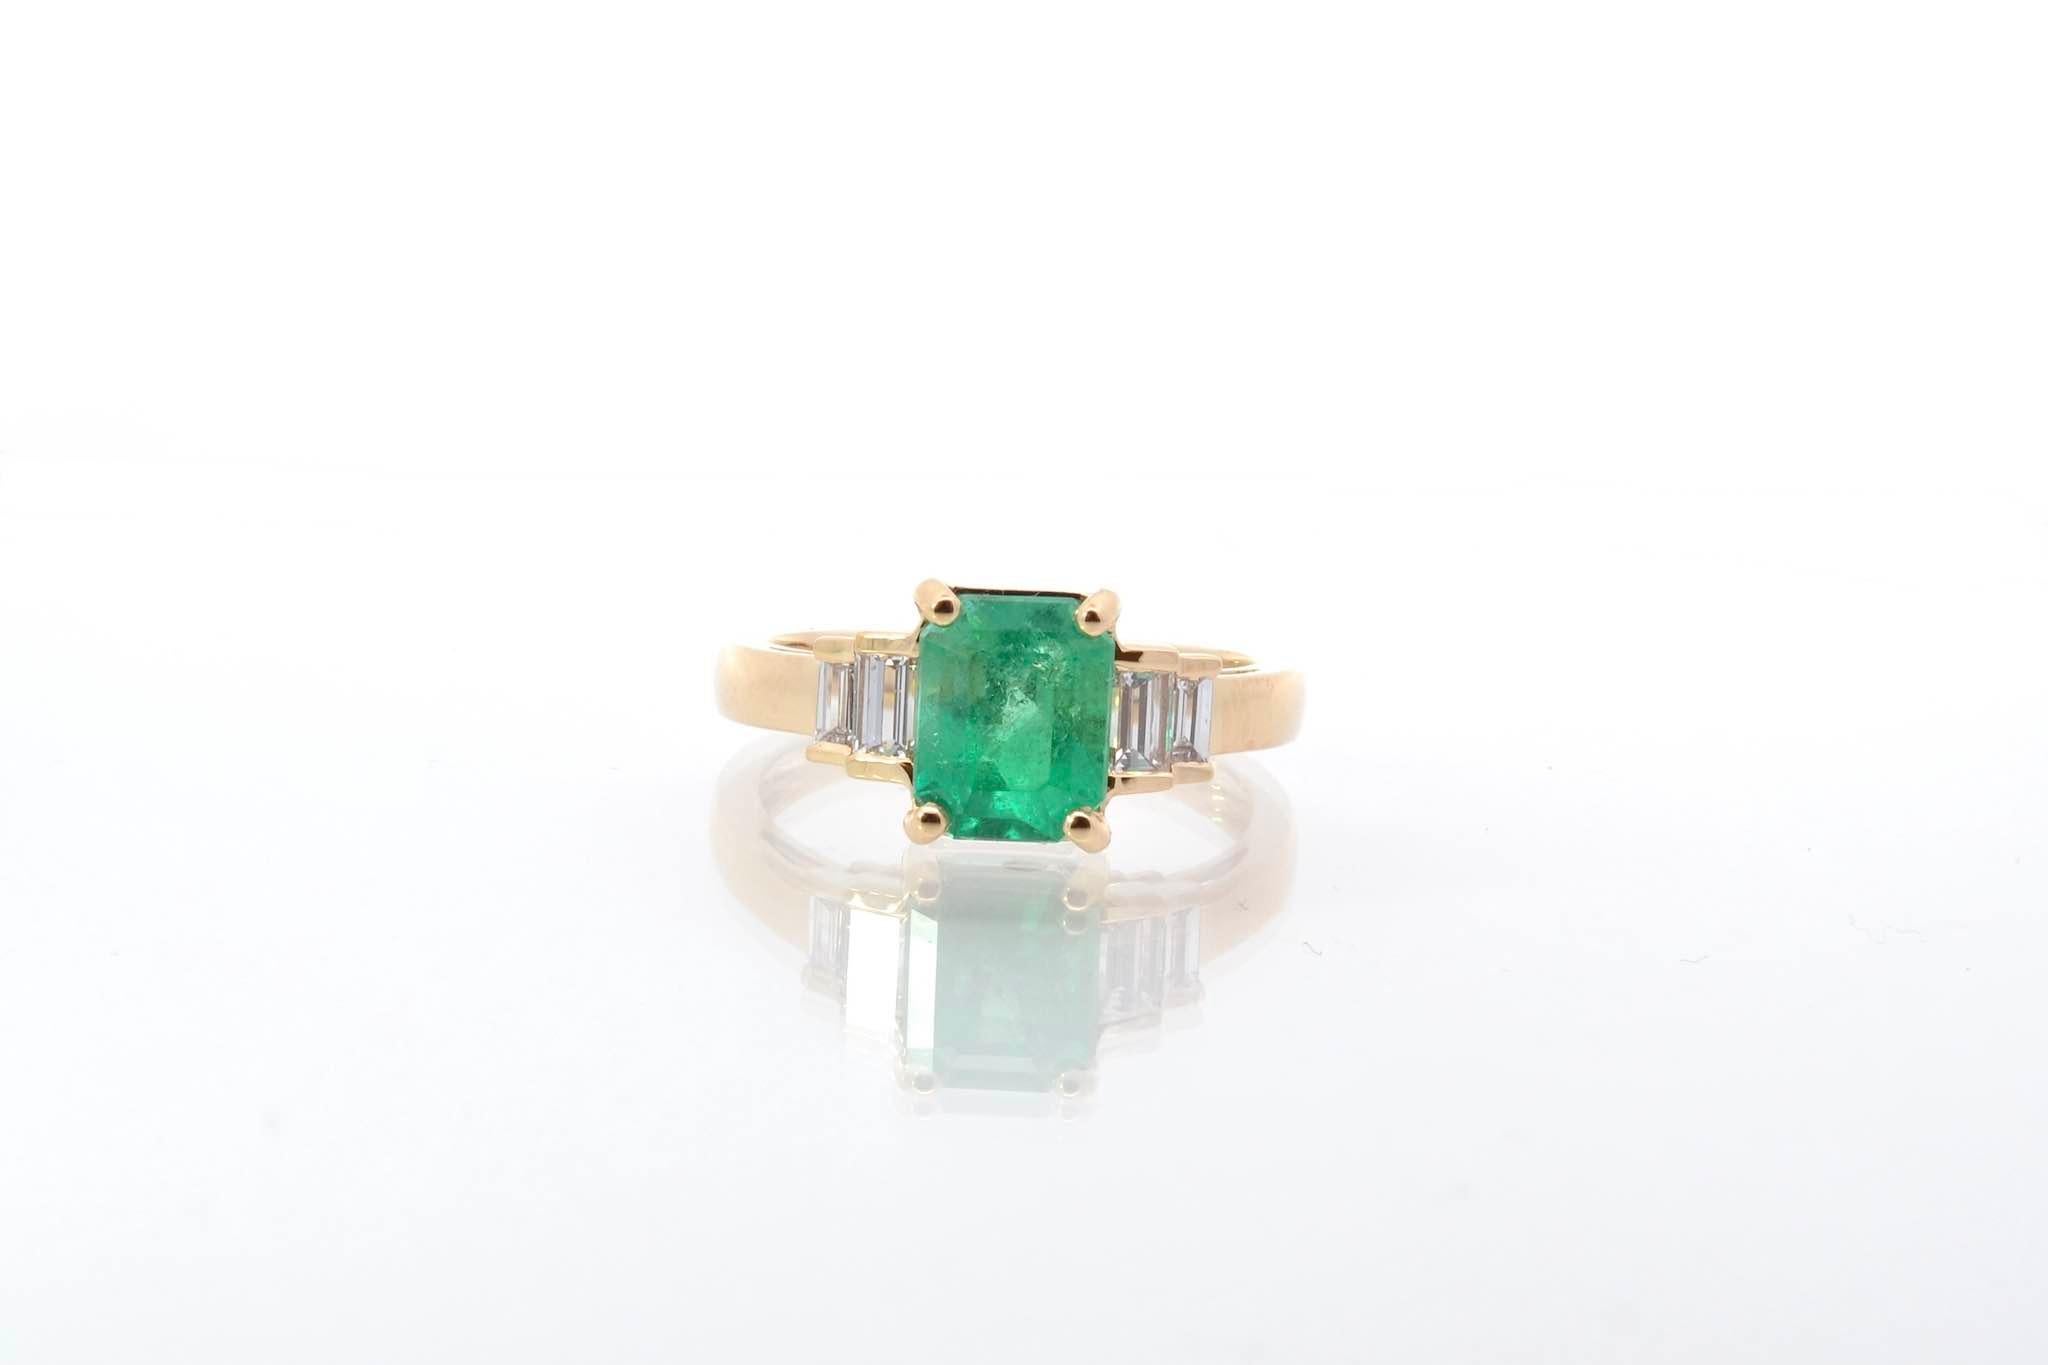 Stones: Emerald: 1.73 cts and 4 baguette diamonds: 0.51 ct
Material: 18k yellow gold
Weight: 4g
Period: Recent vintage style
Size: 53 (free sizing)
Certificate
Ref. : 25572 25536